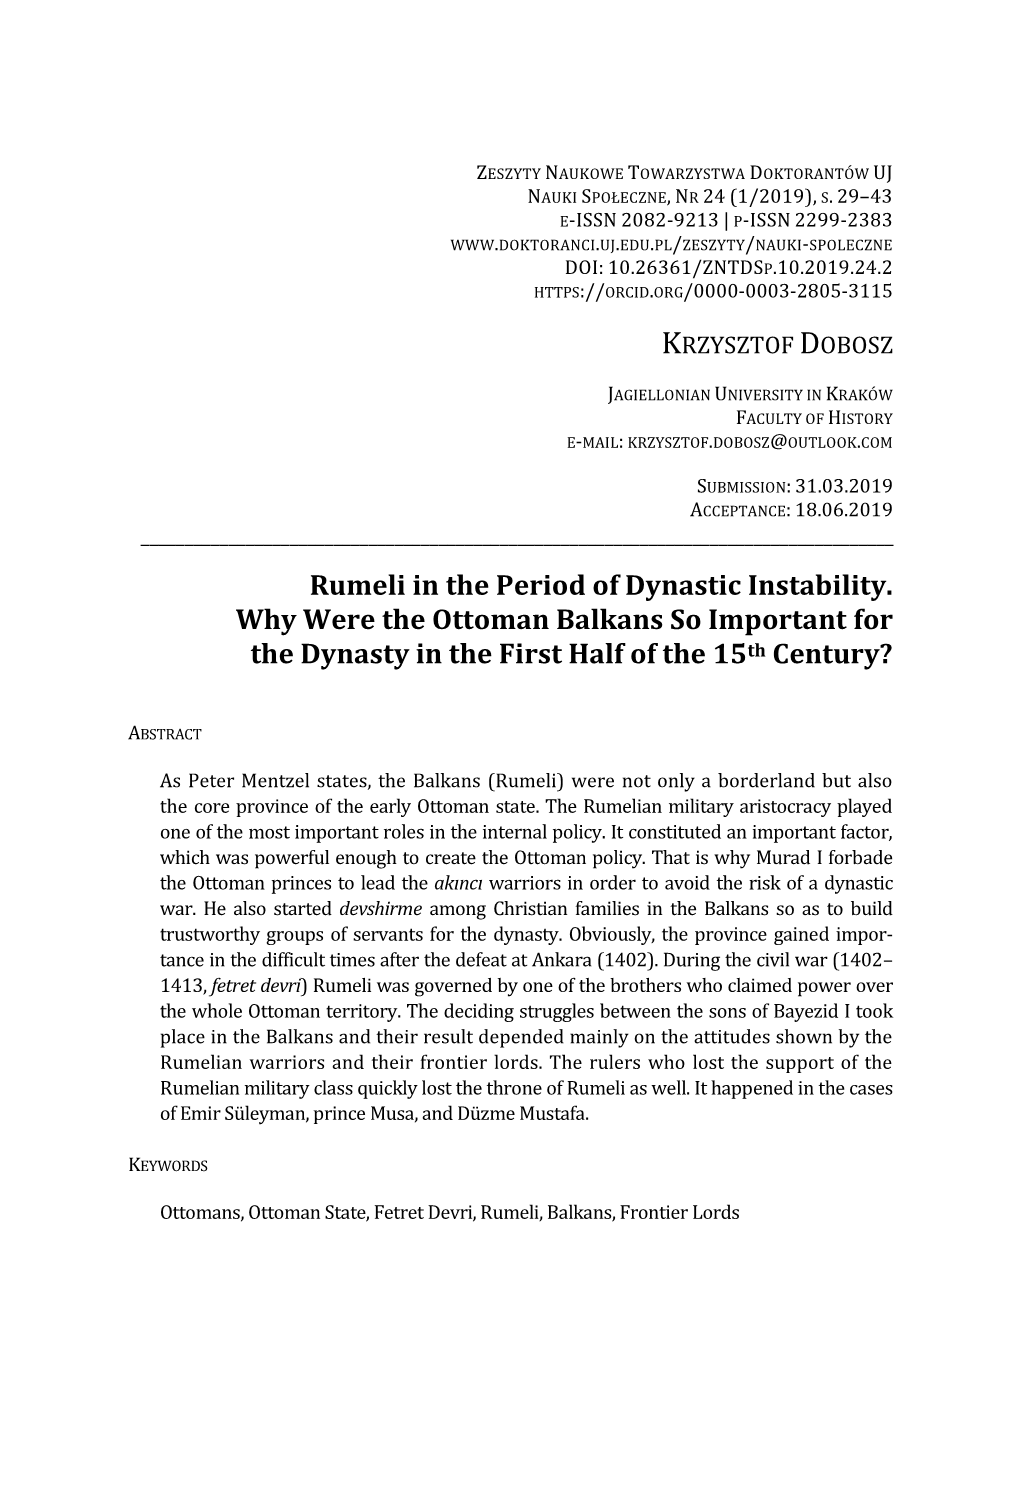 Rumeli in the Period of Dynastic Instability. Why Were the Ottoman Balkans So Important for the Dynasty in the First Half of the 15Th Century?